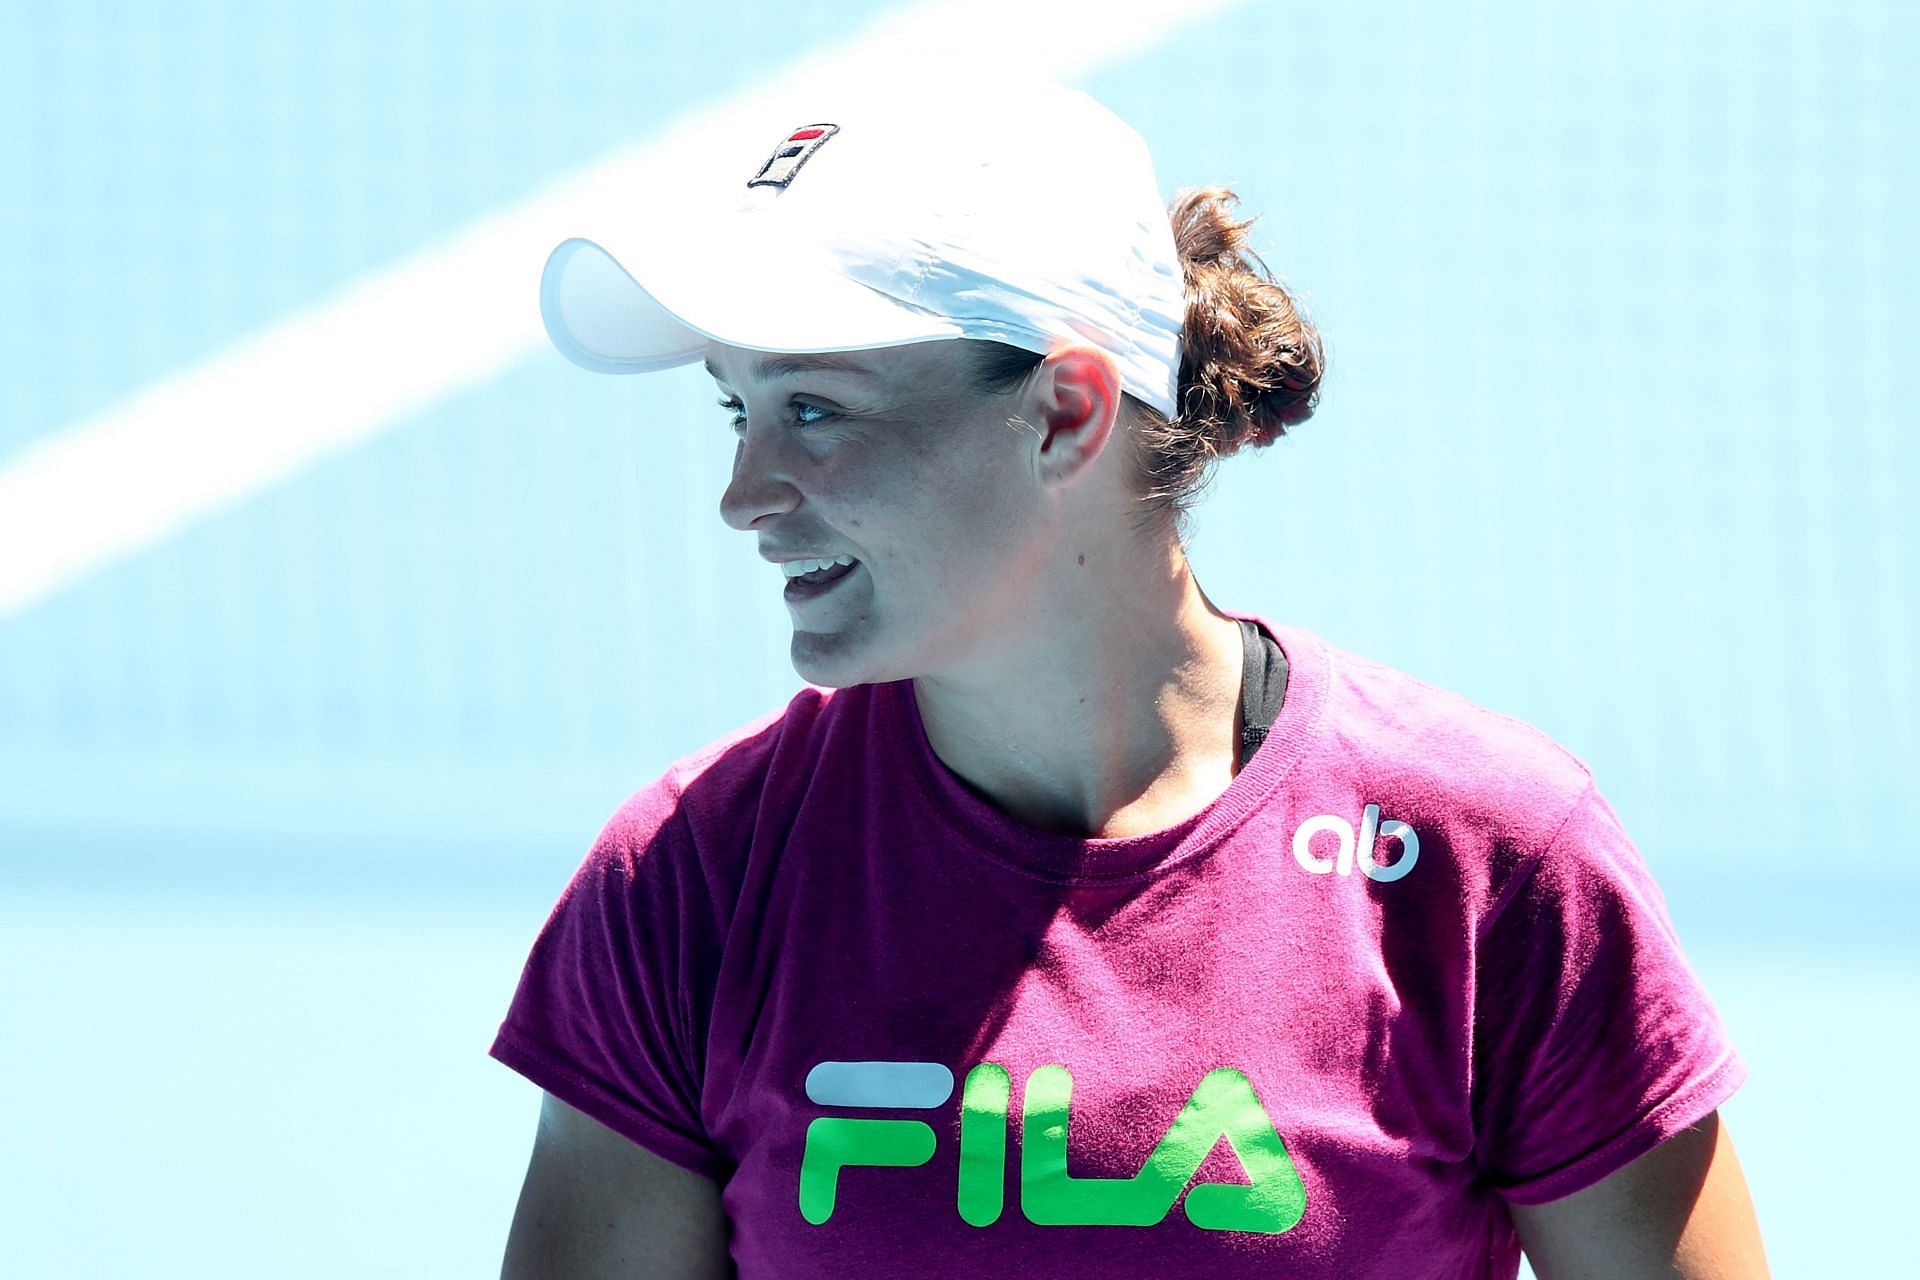 Barty smiles during a practice session ahead of the 2022 Australian Open